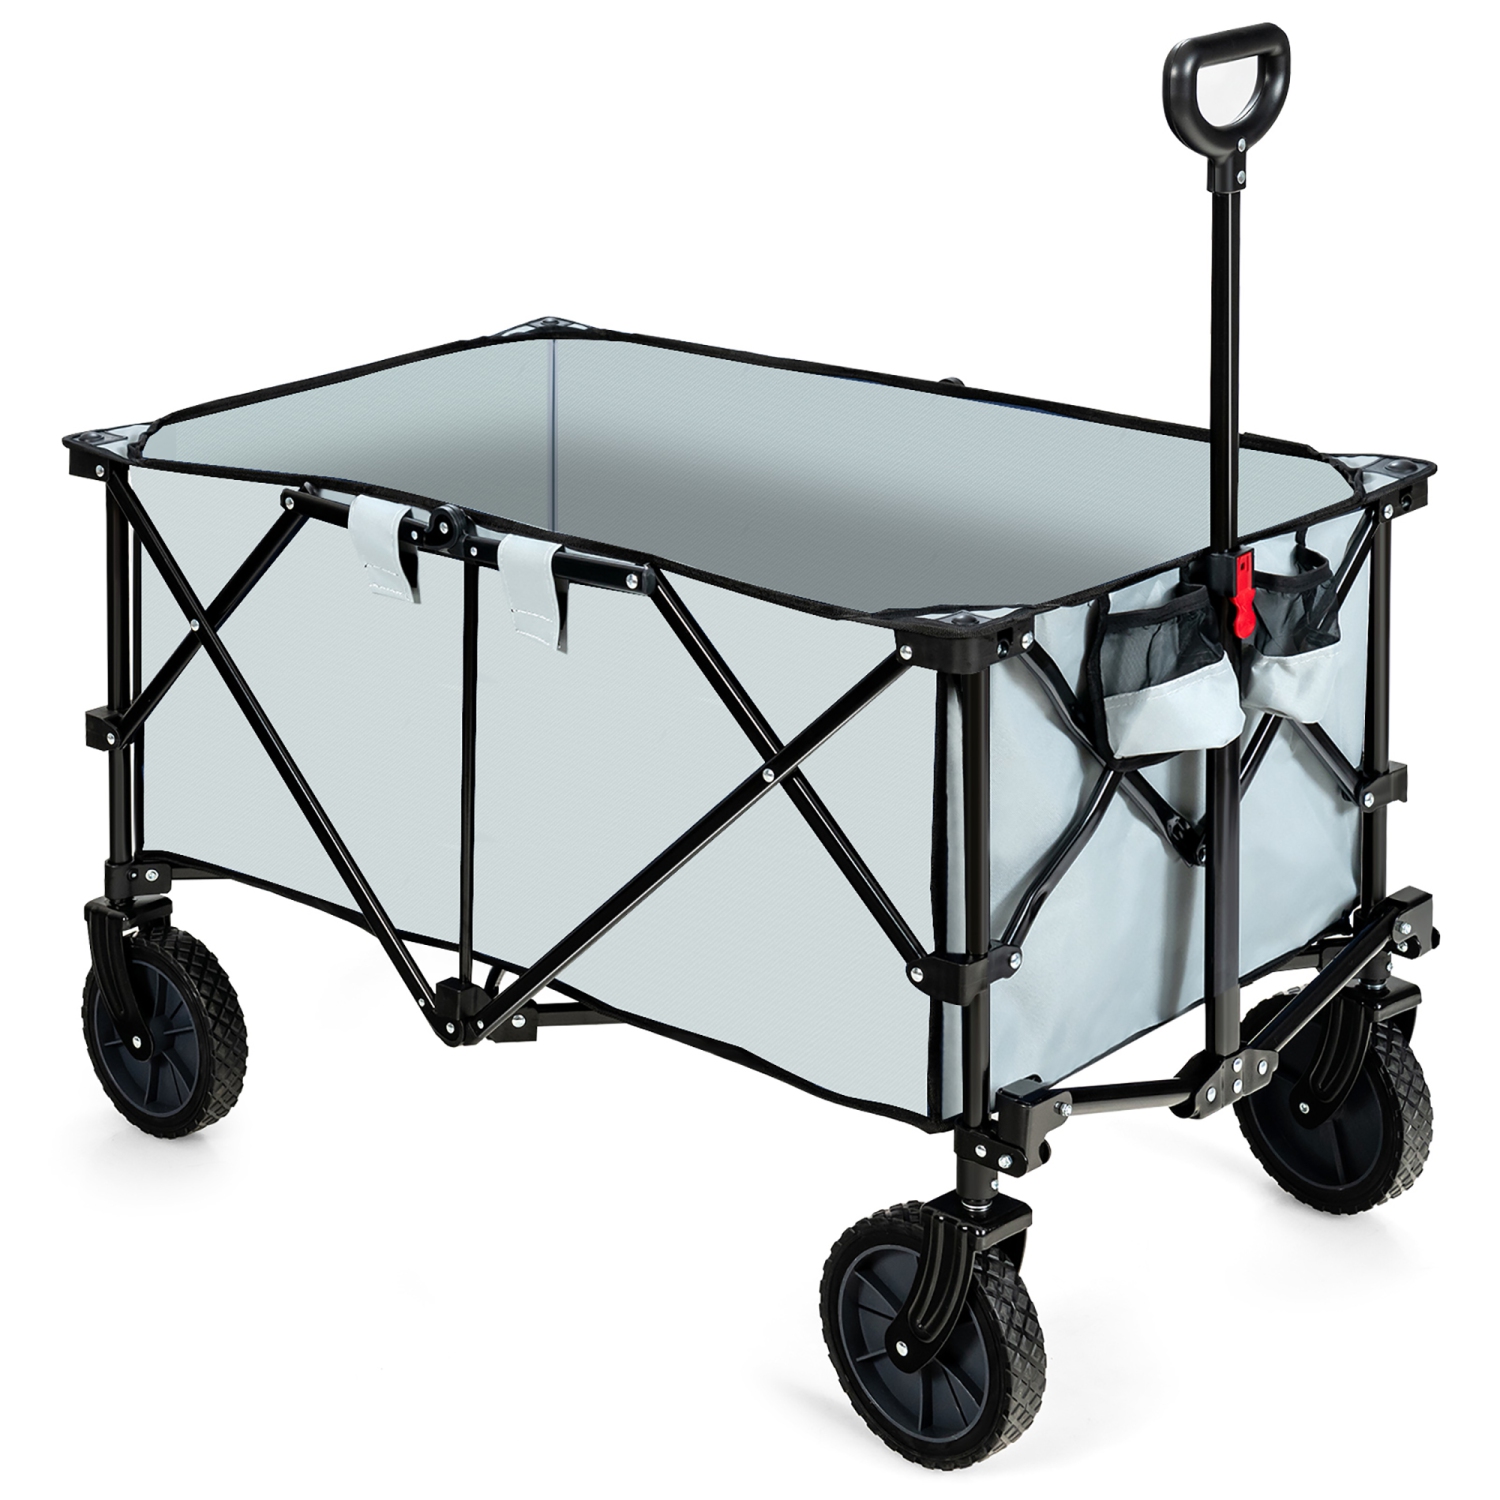 Costway Folding Collapsible Wagon Utility Camping Cart W/Wheels & Adjustable Handle